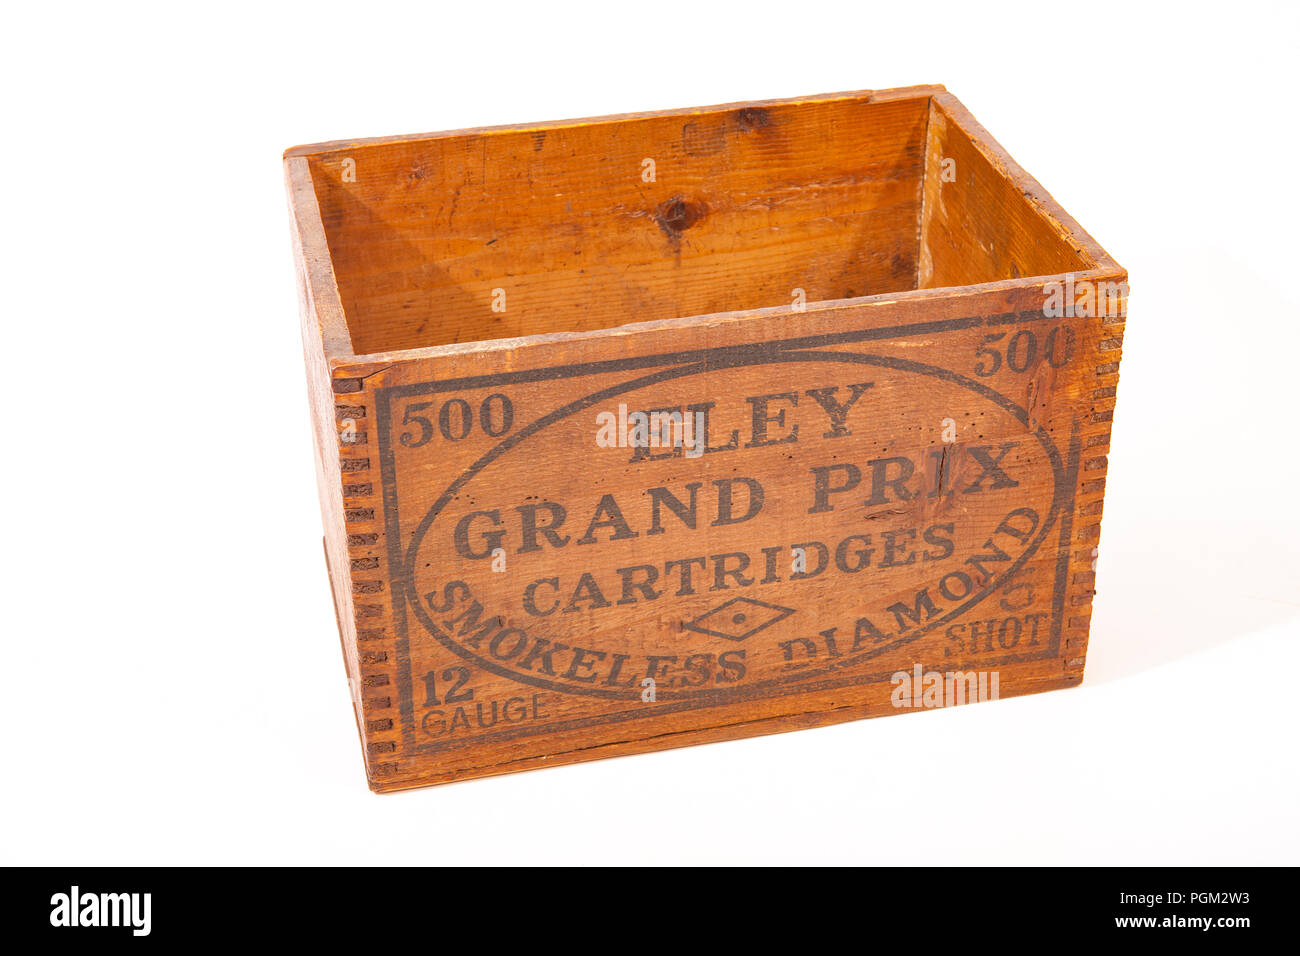 An old Eley Grand Prix 12 gauge/bore wooden cartridge box. From a collection sporting collectibles. North Dorset England UK GB Stock Photo